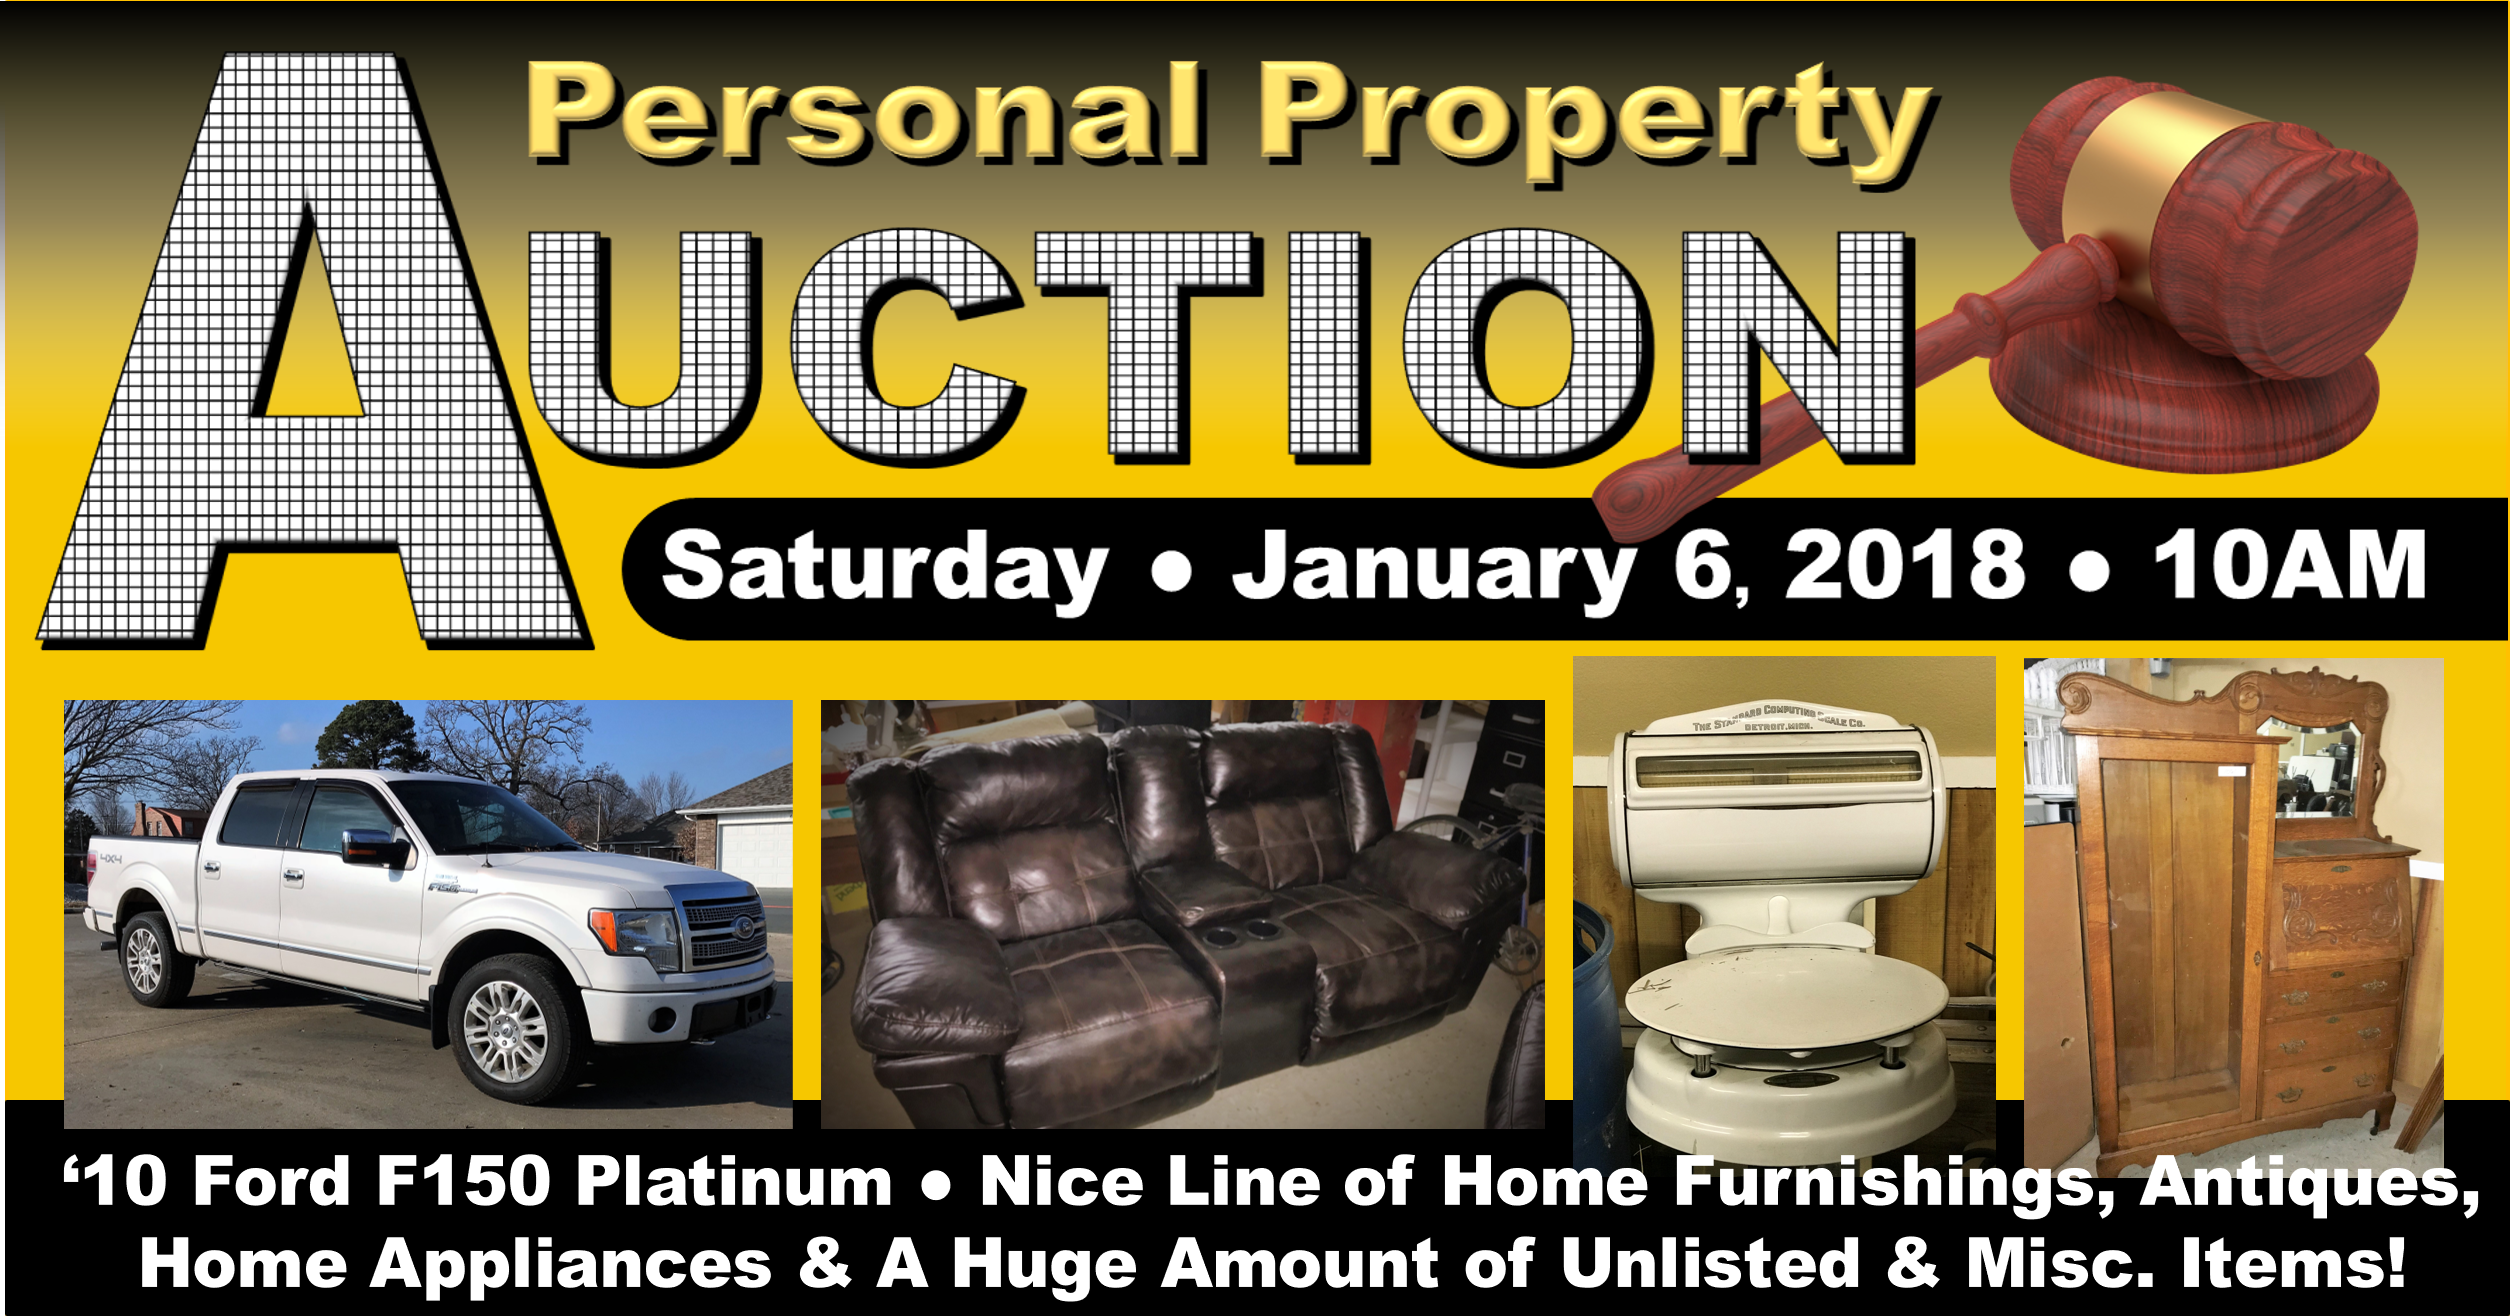 Personal Property Auction